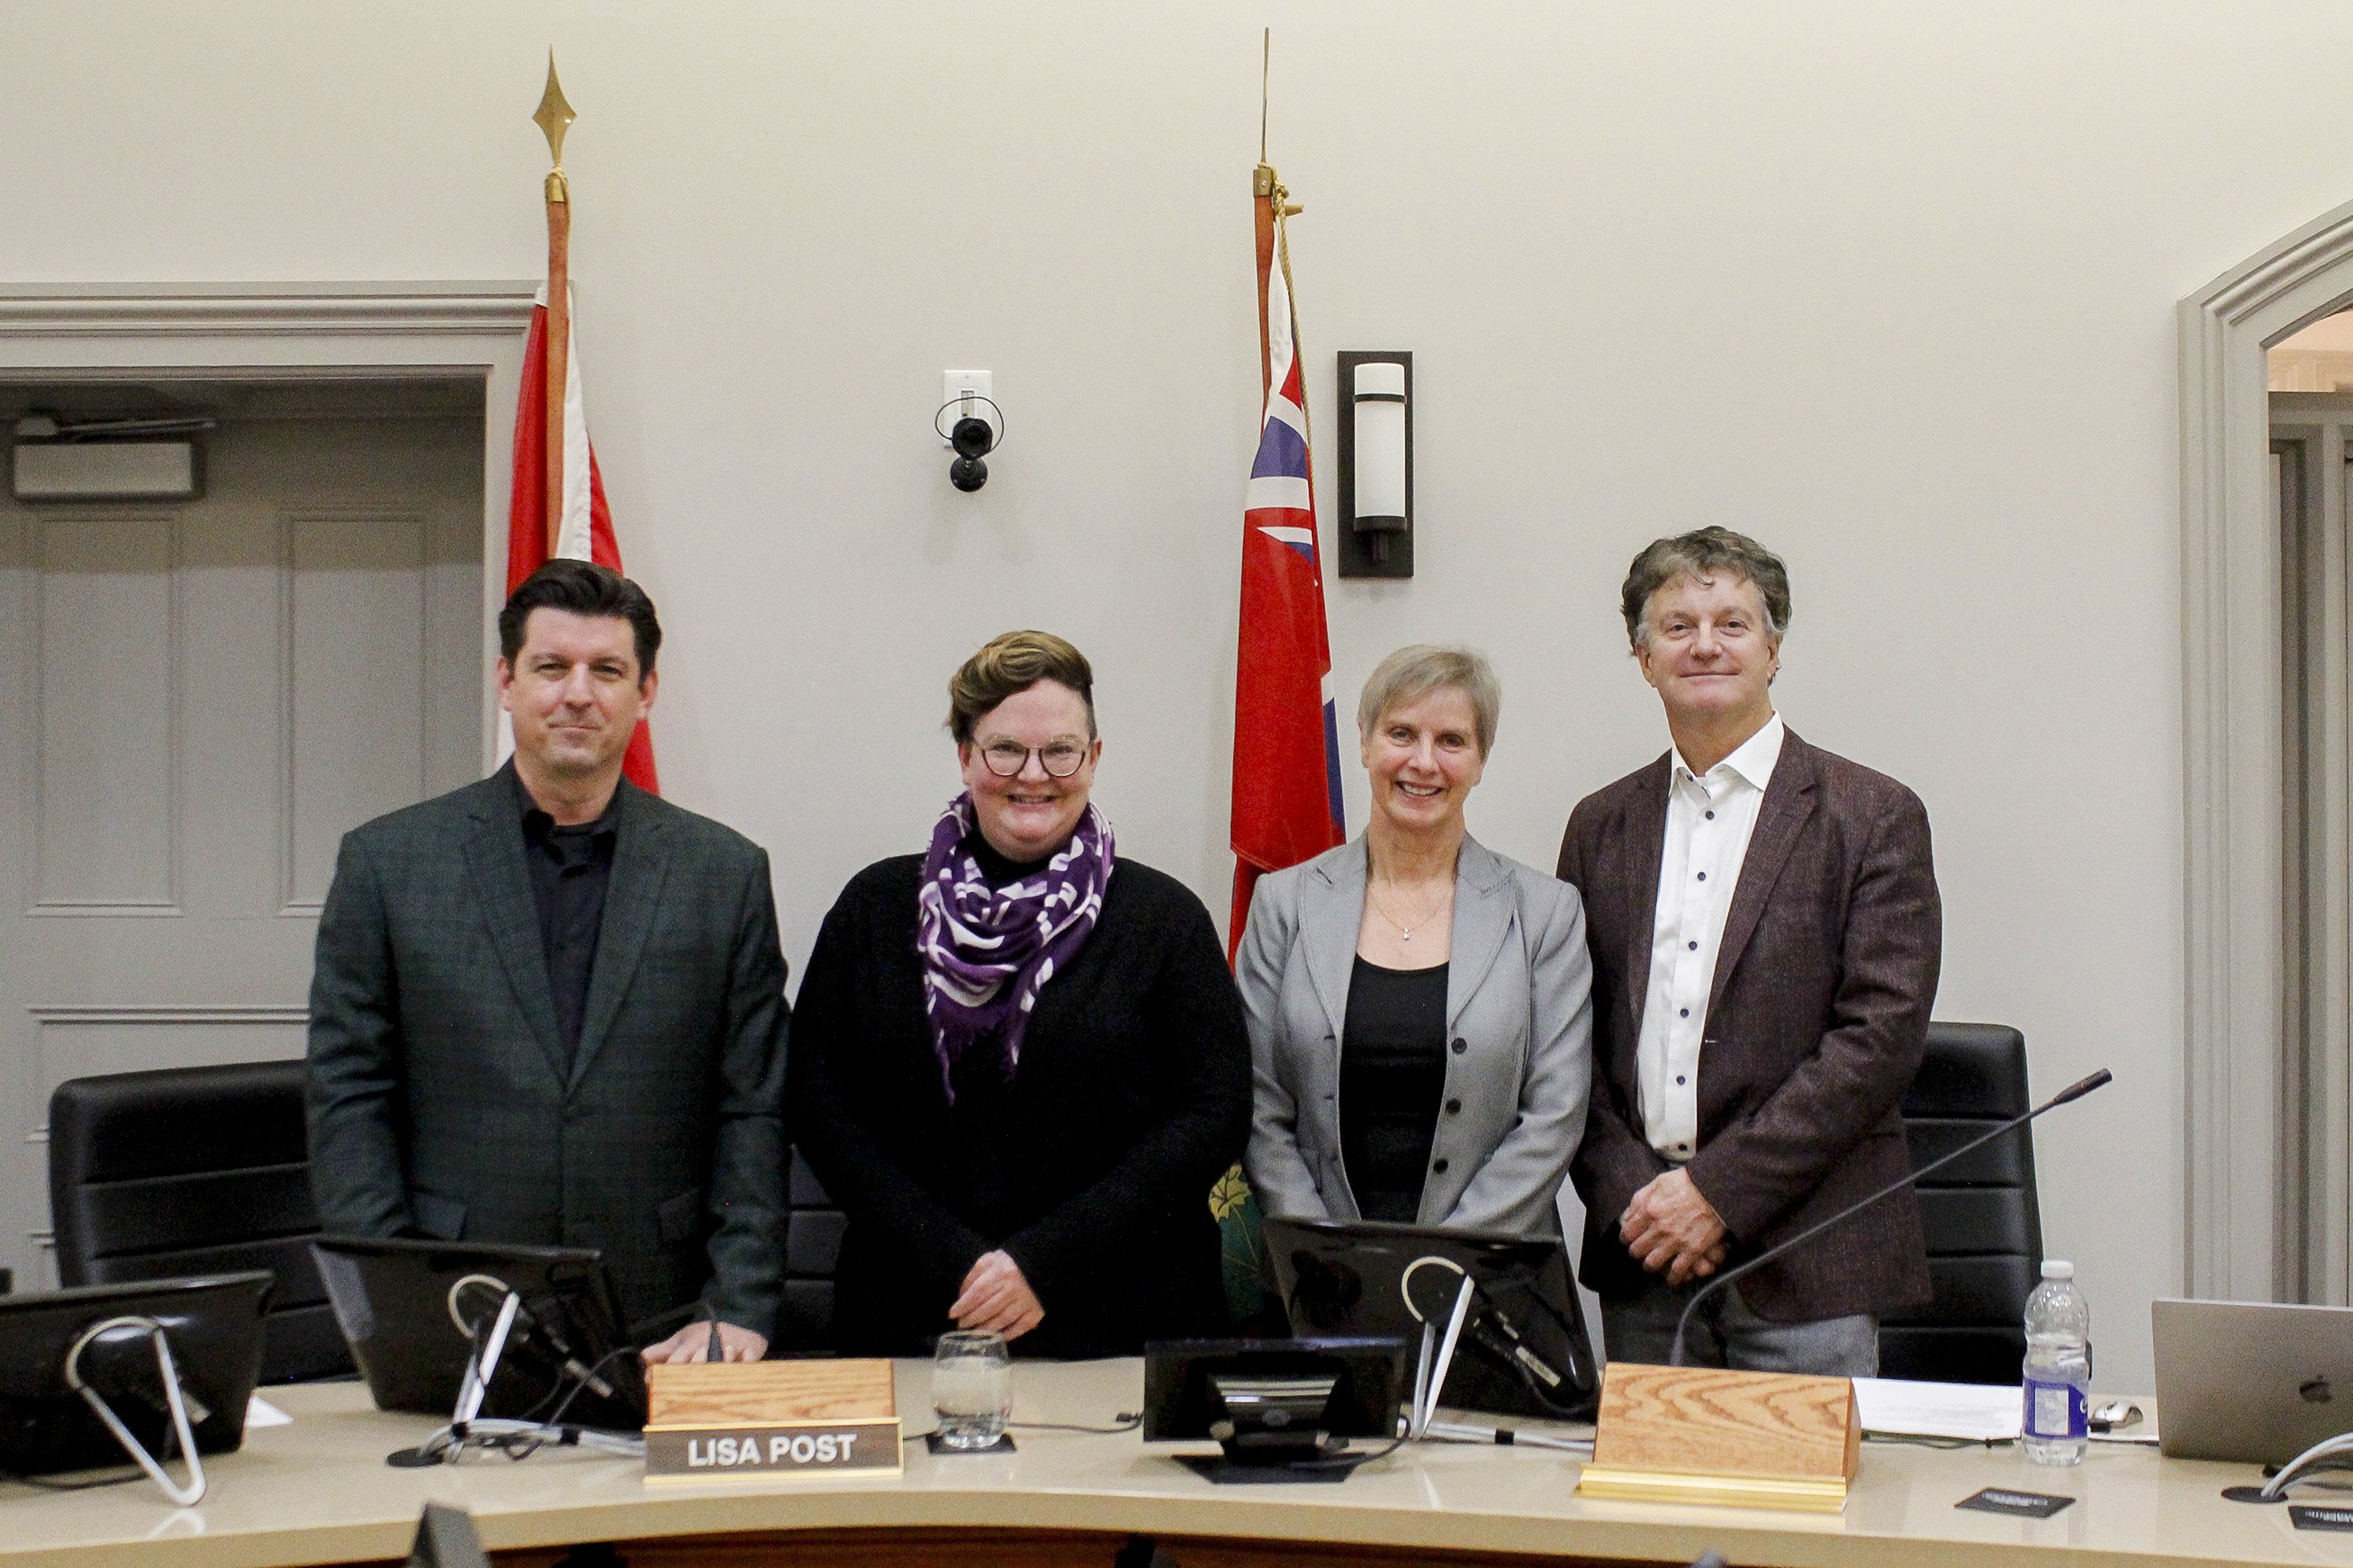 Members of the Police Services Board standing in the Orangeville Town Hall Council Chambers